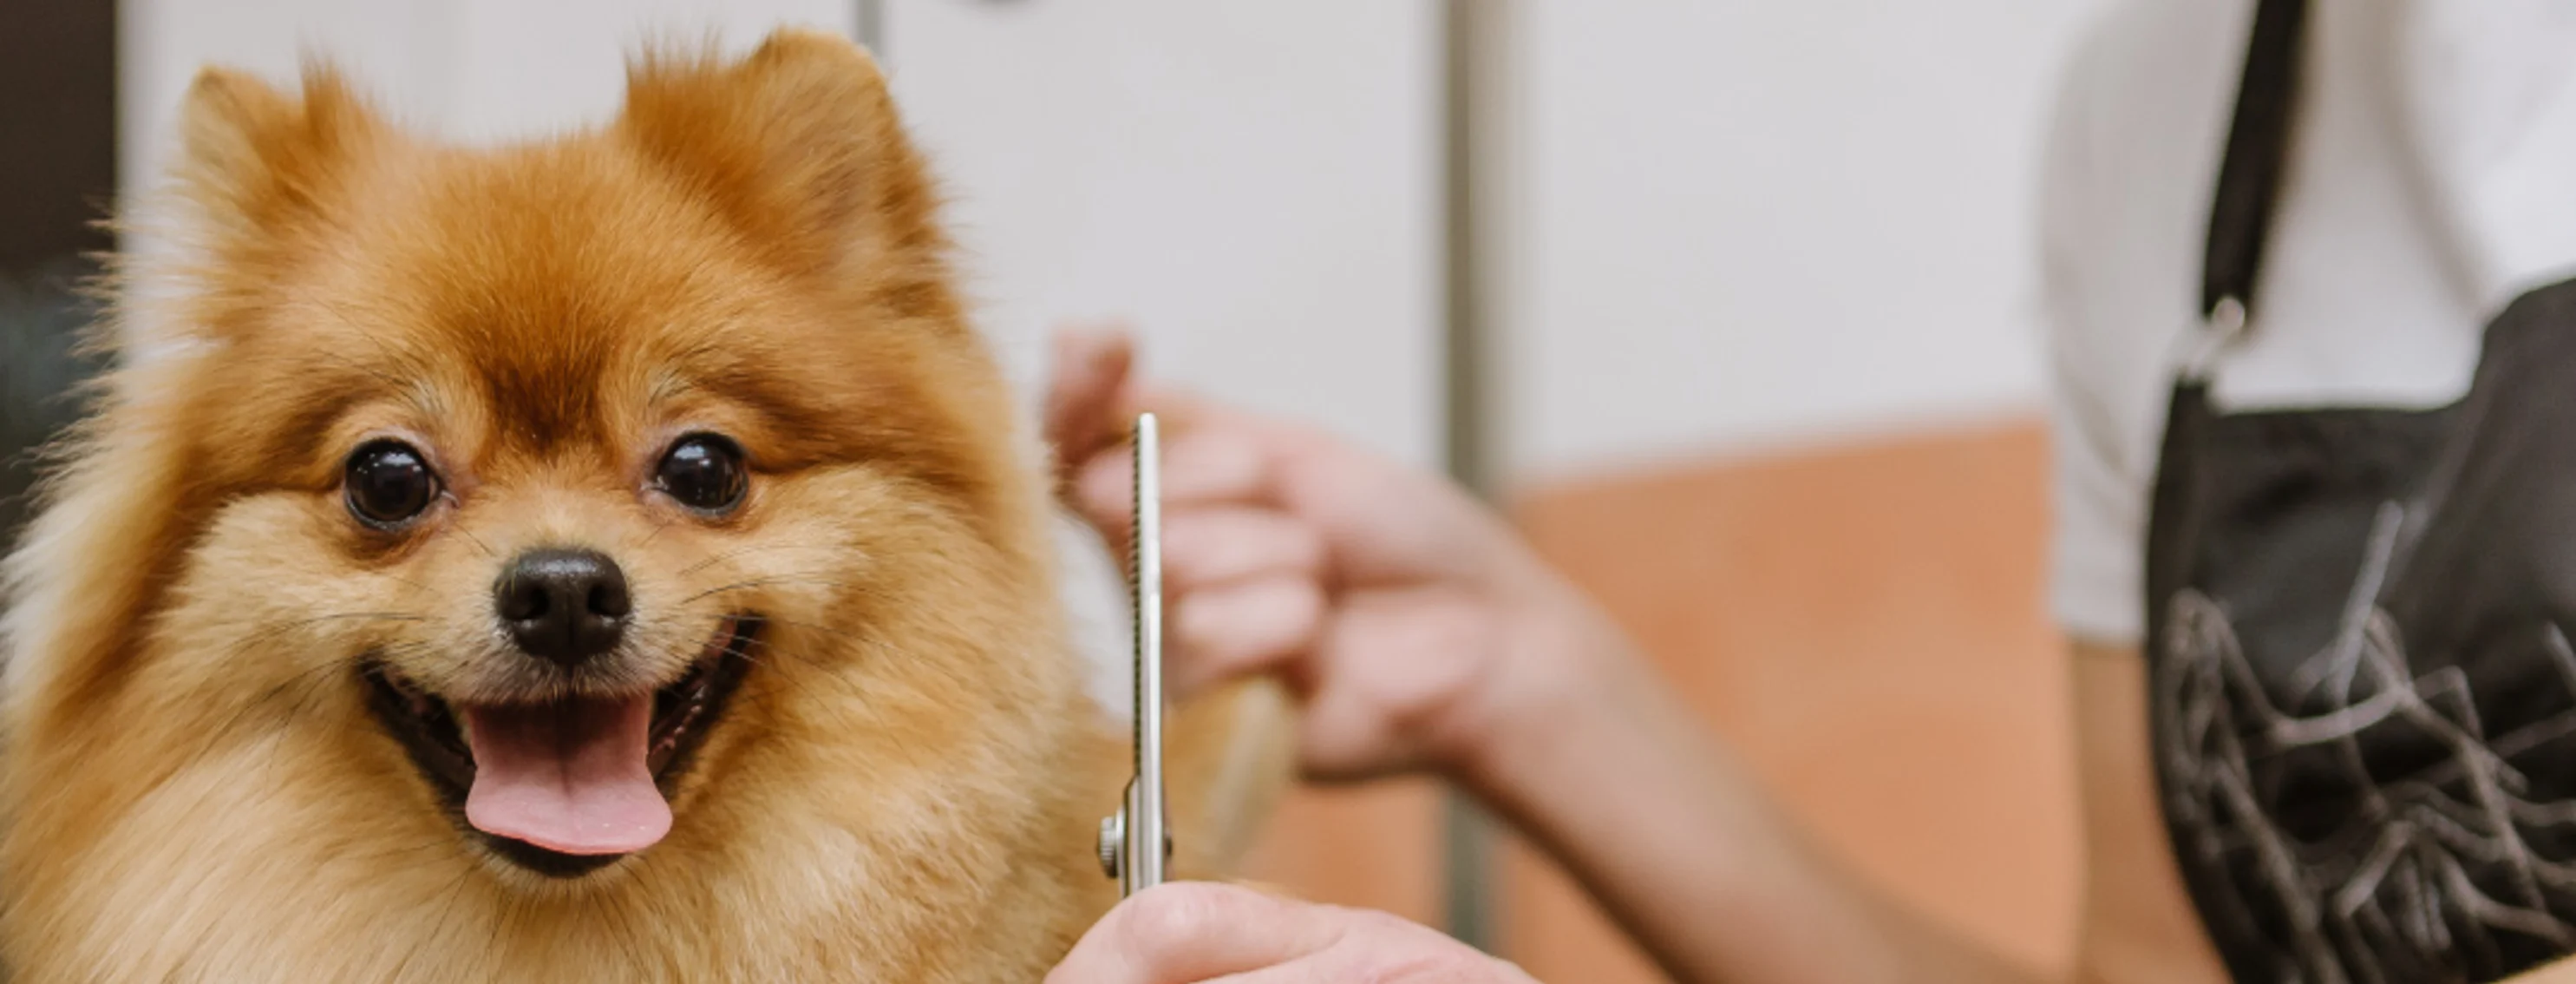 Pomeranian being groomed by a groomer